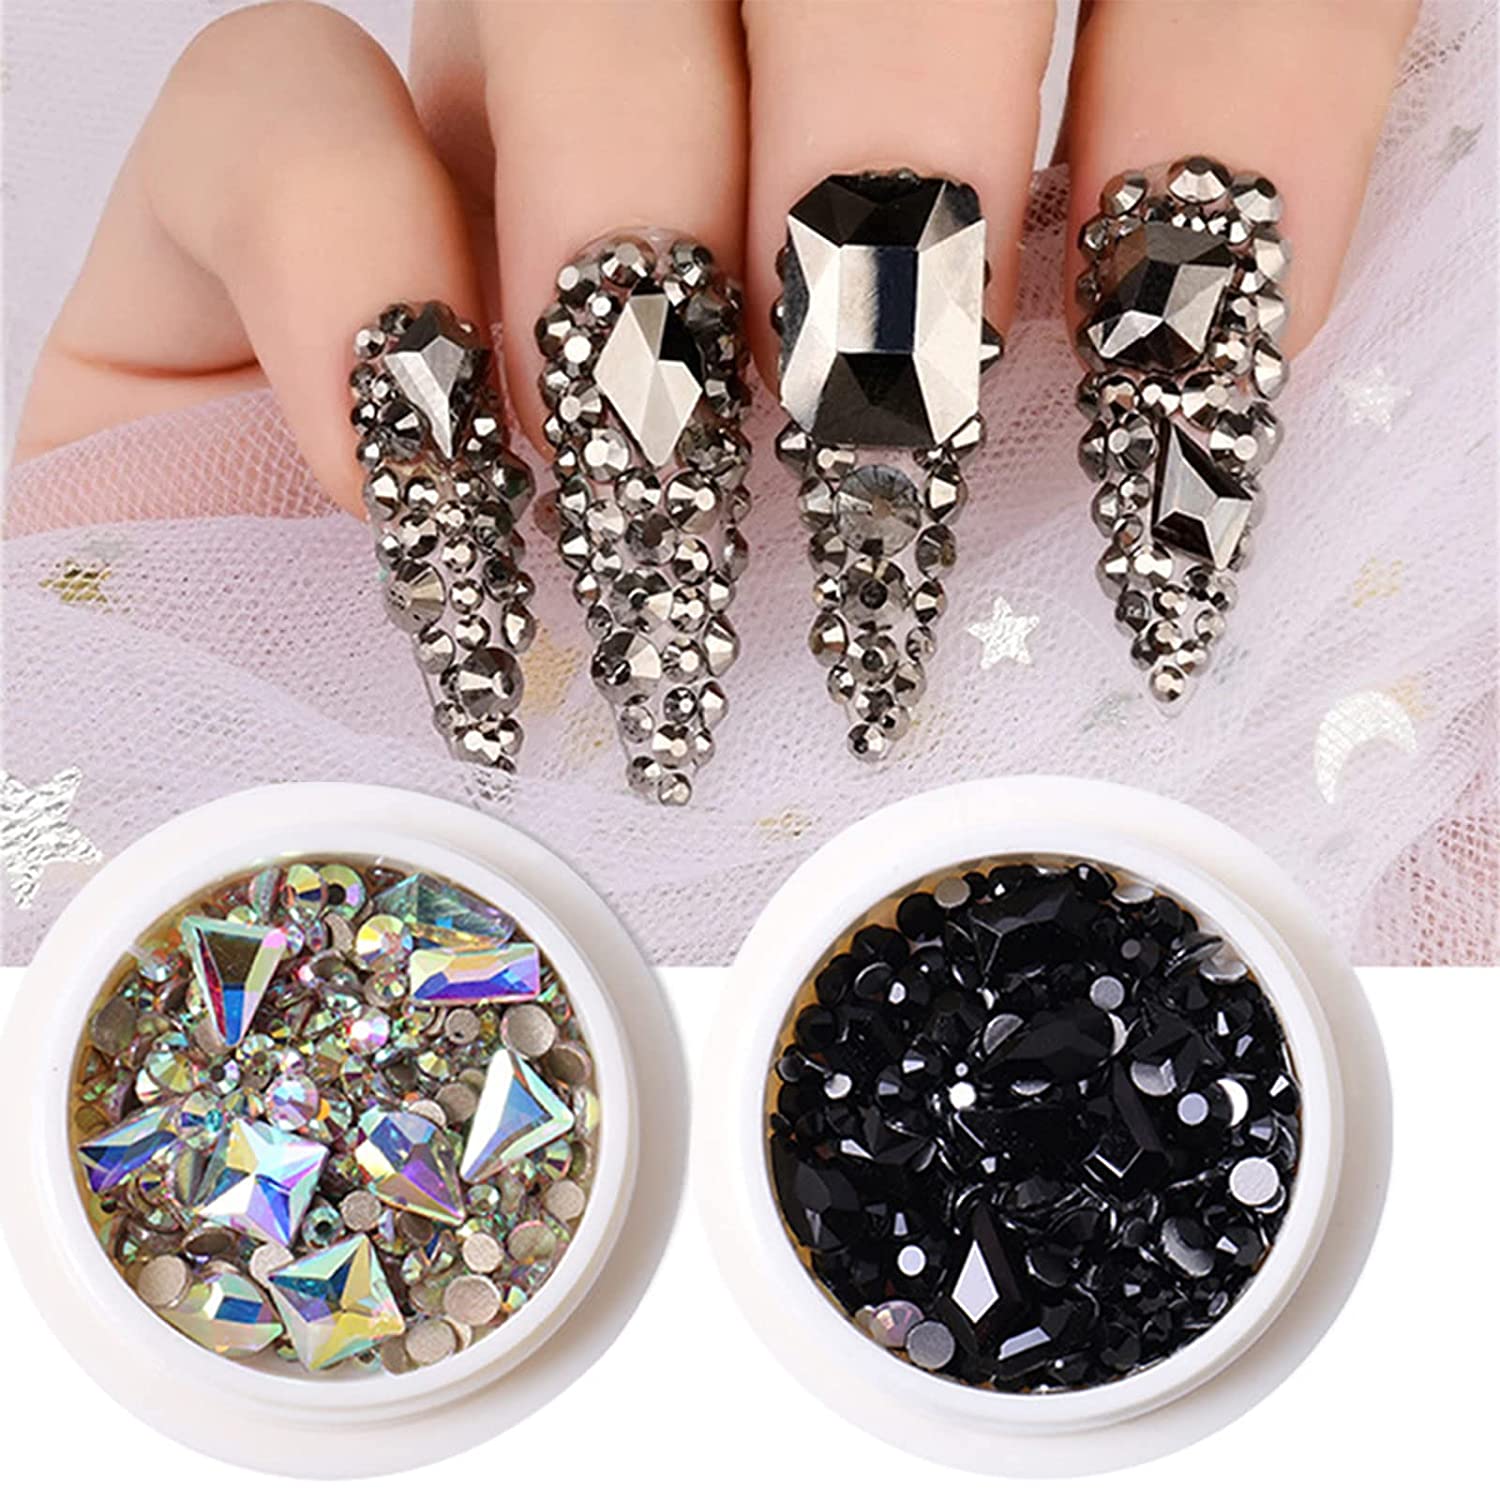 3D Nail Charms Rhinestones for Nails Mix Shapes Crystals Shiny Color Gems  Design Multi Sized Diamonds Art Decoration - style 1 